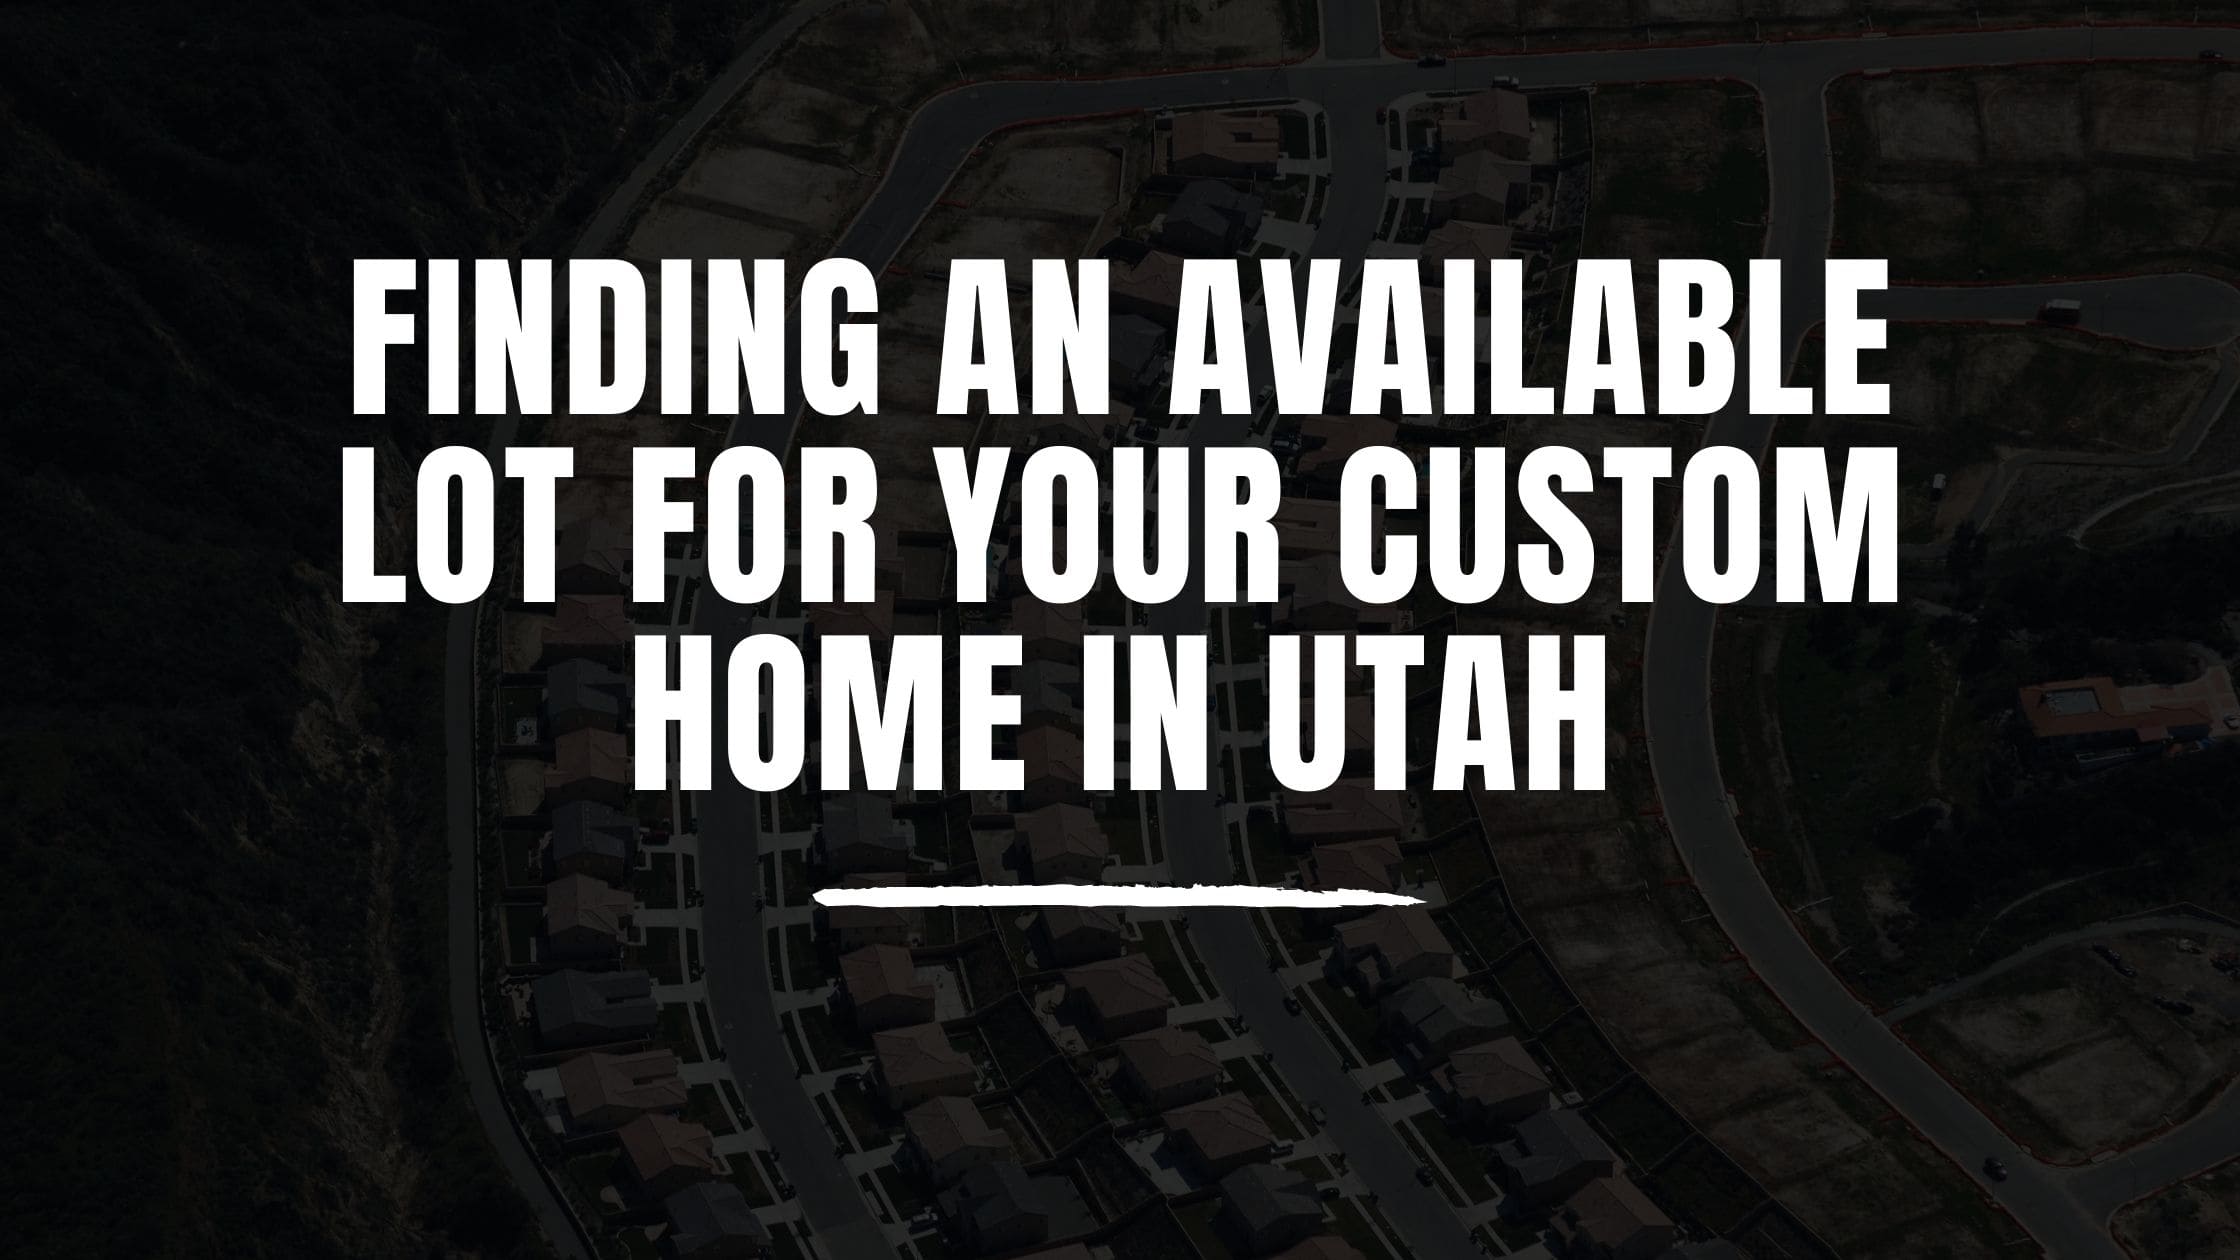 Finding an Available Lot for your Custom Home in Utah